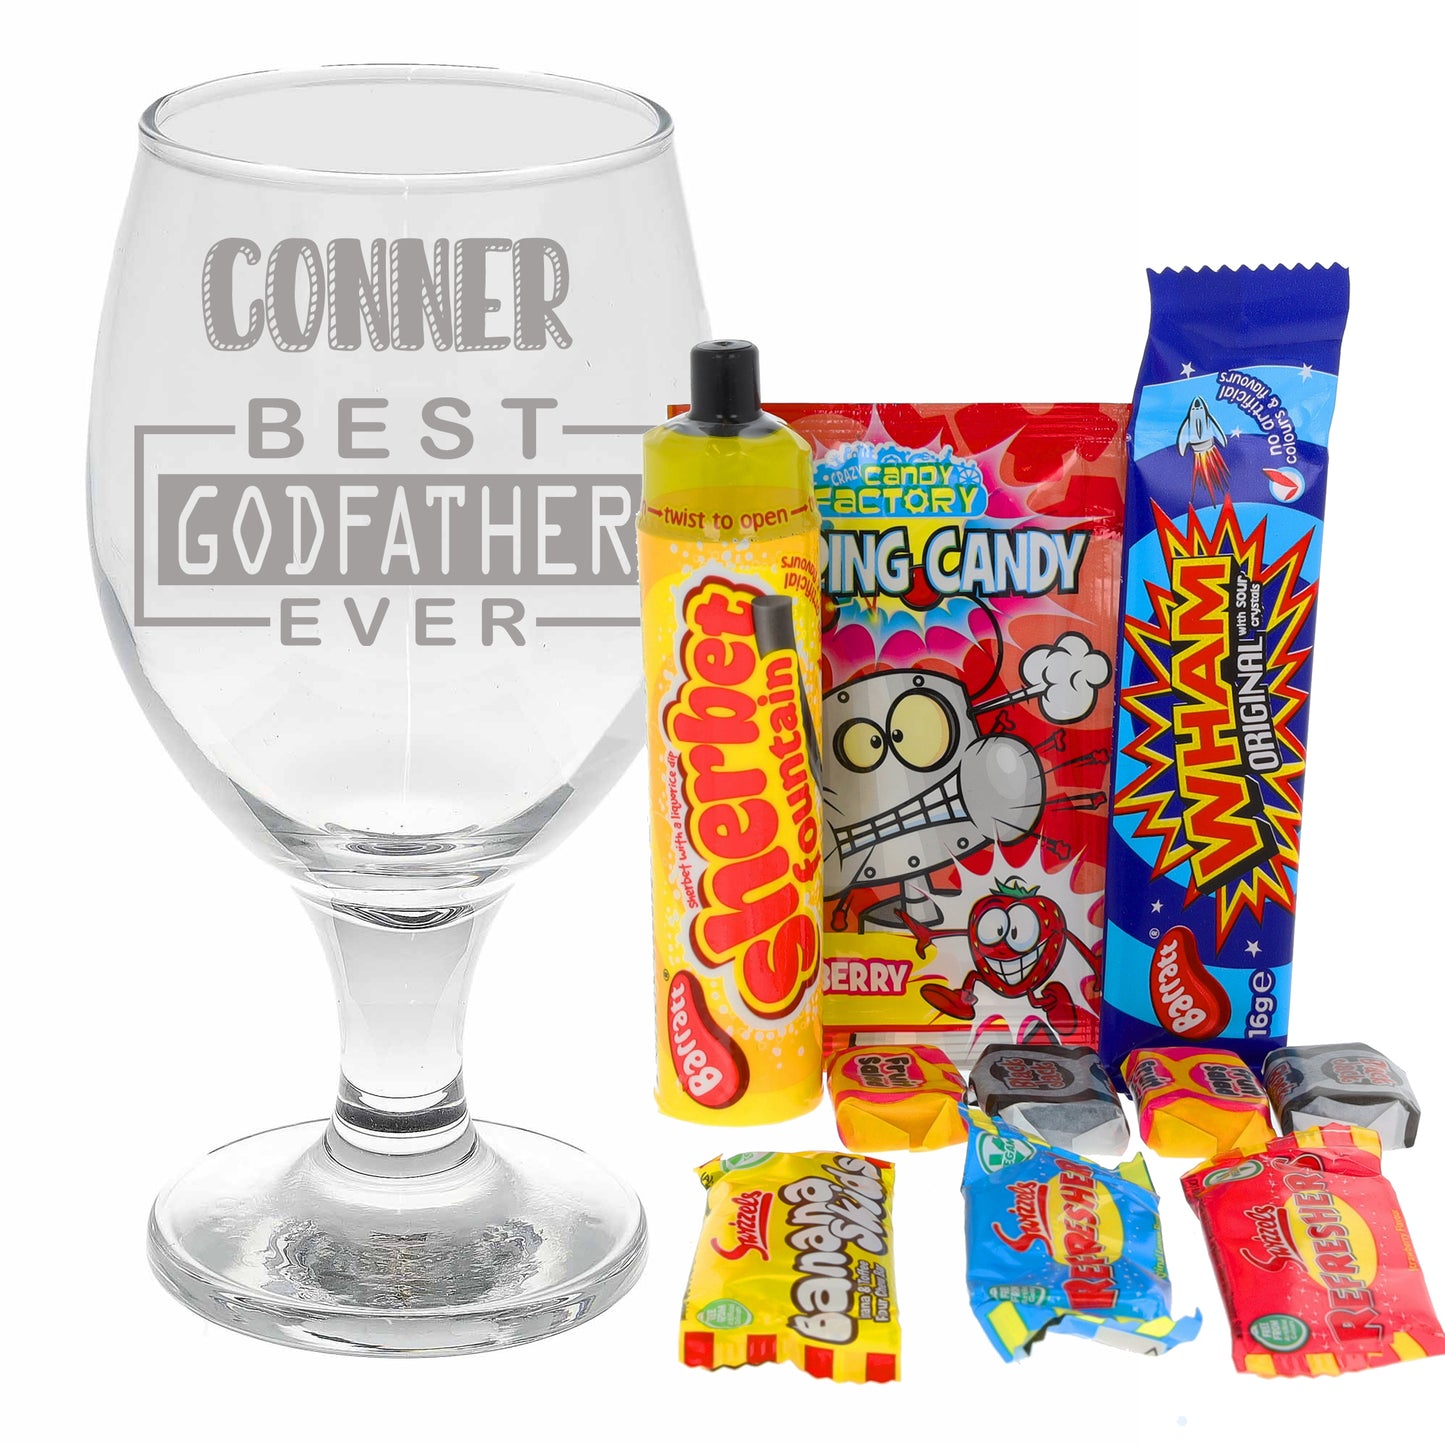 Personalised Godfather Filled Craft Beer Glass Gift  - Always Looking Good -   